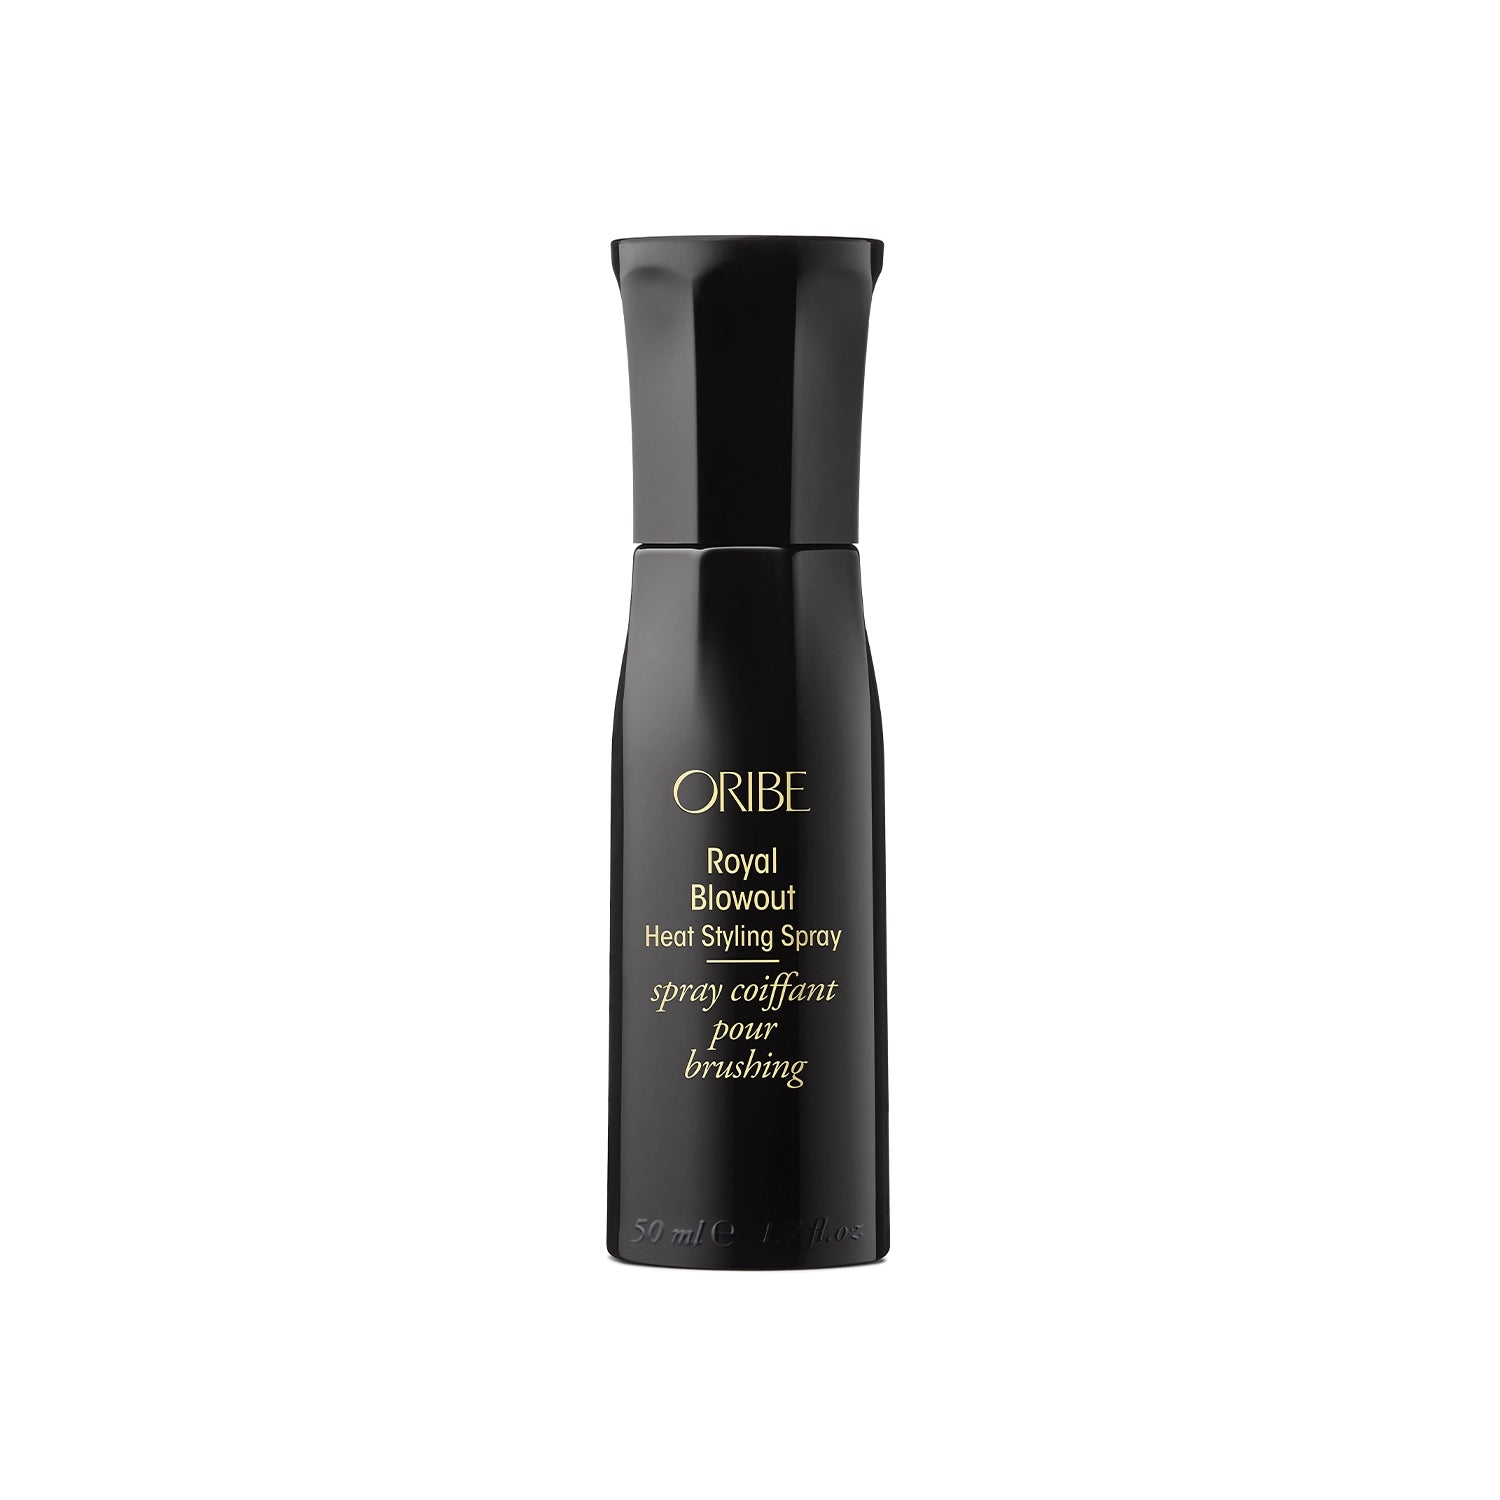 ORIBE - Royal Blowout Blow Dry Styling Spray (Travel Size)